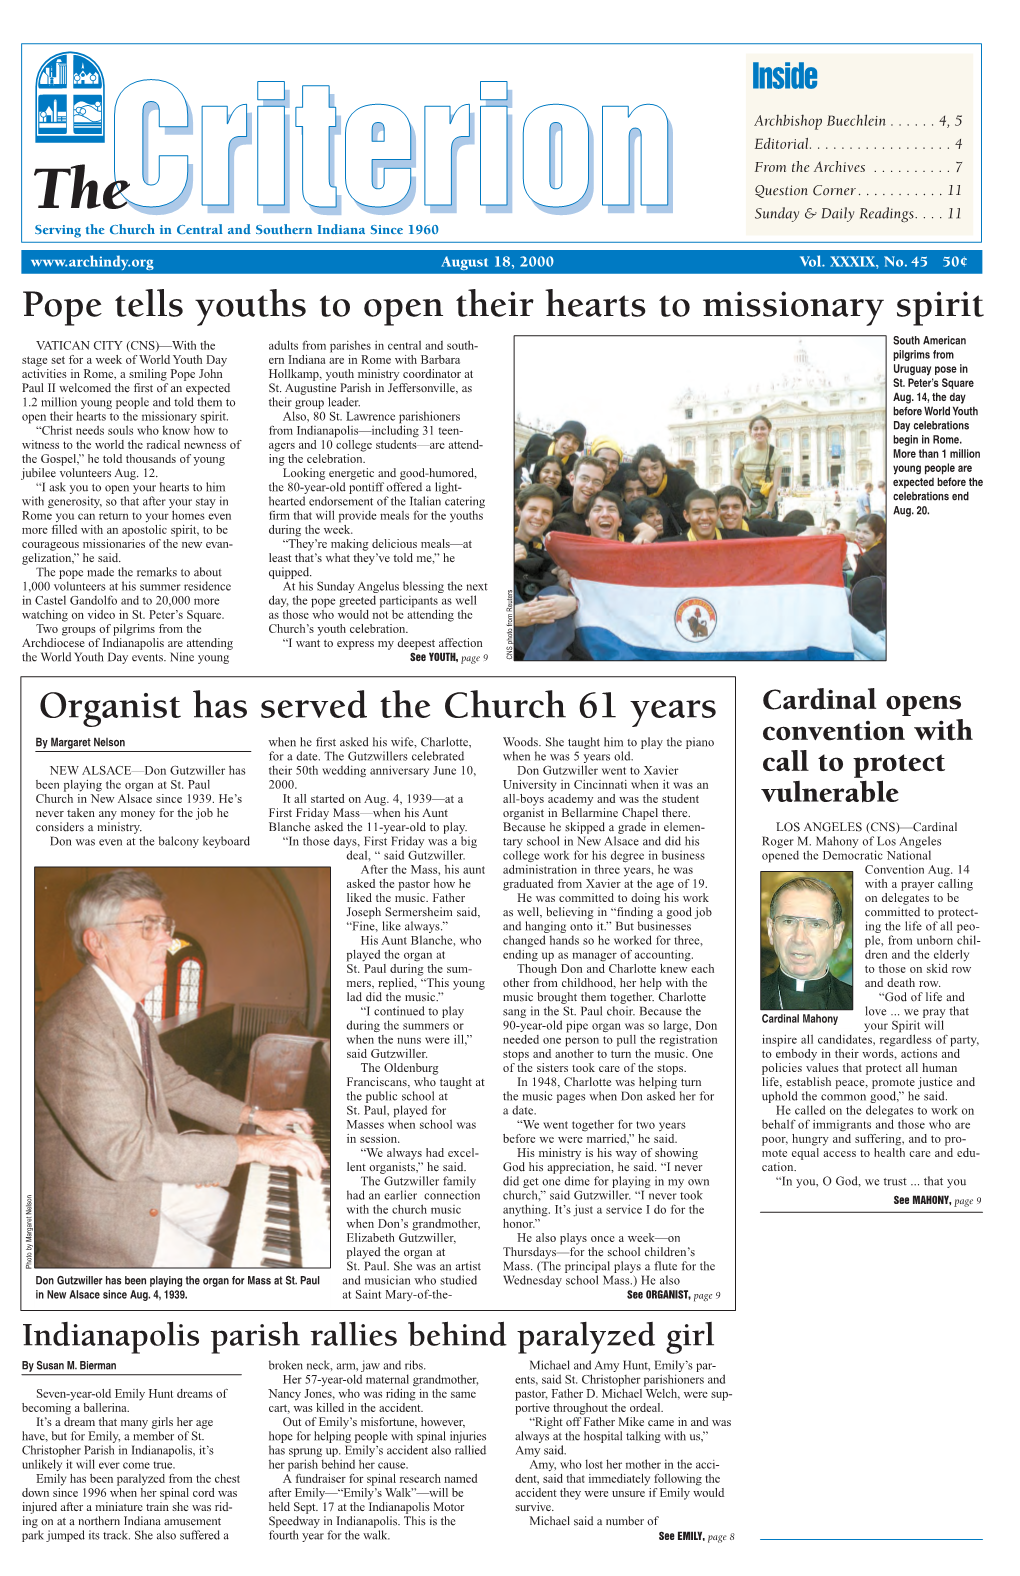 Pope Tells Youths to Open Their Hearts to Missionary Spirit Organist